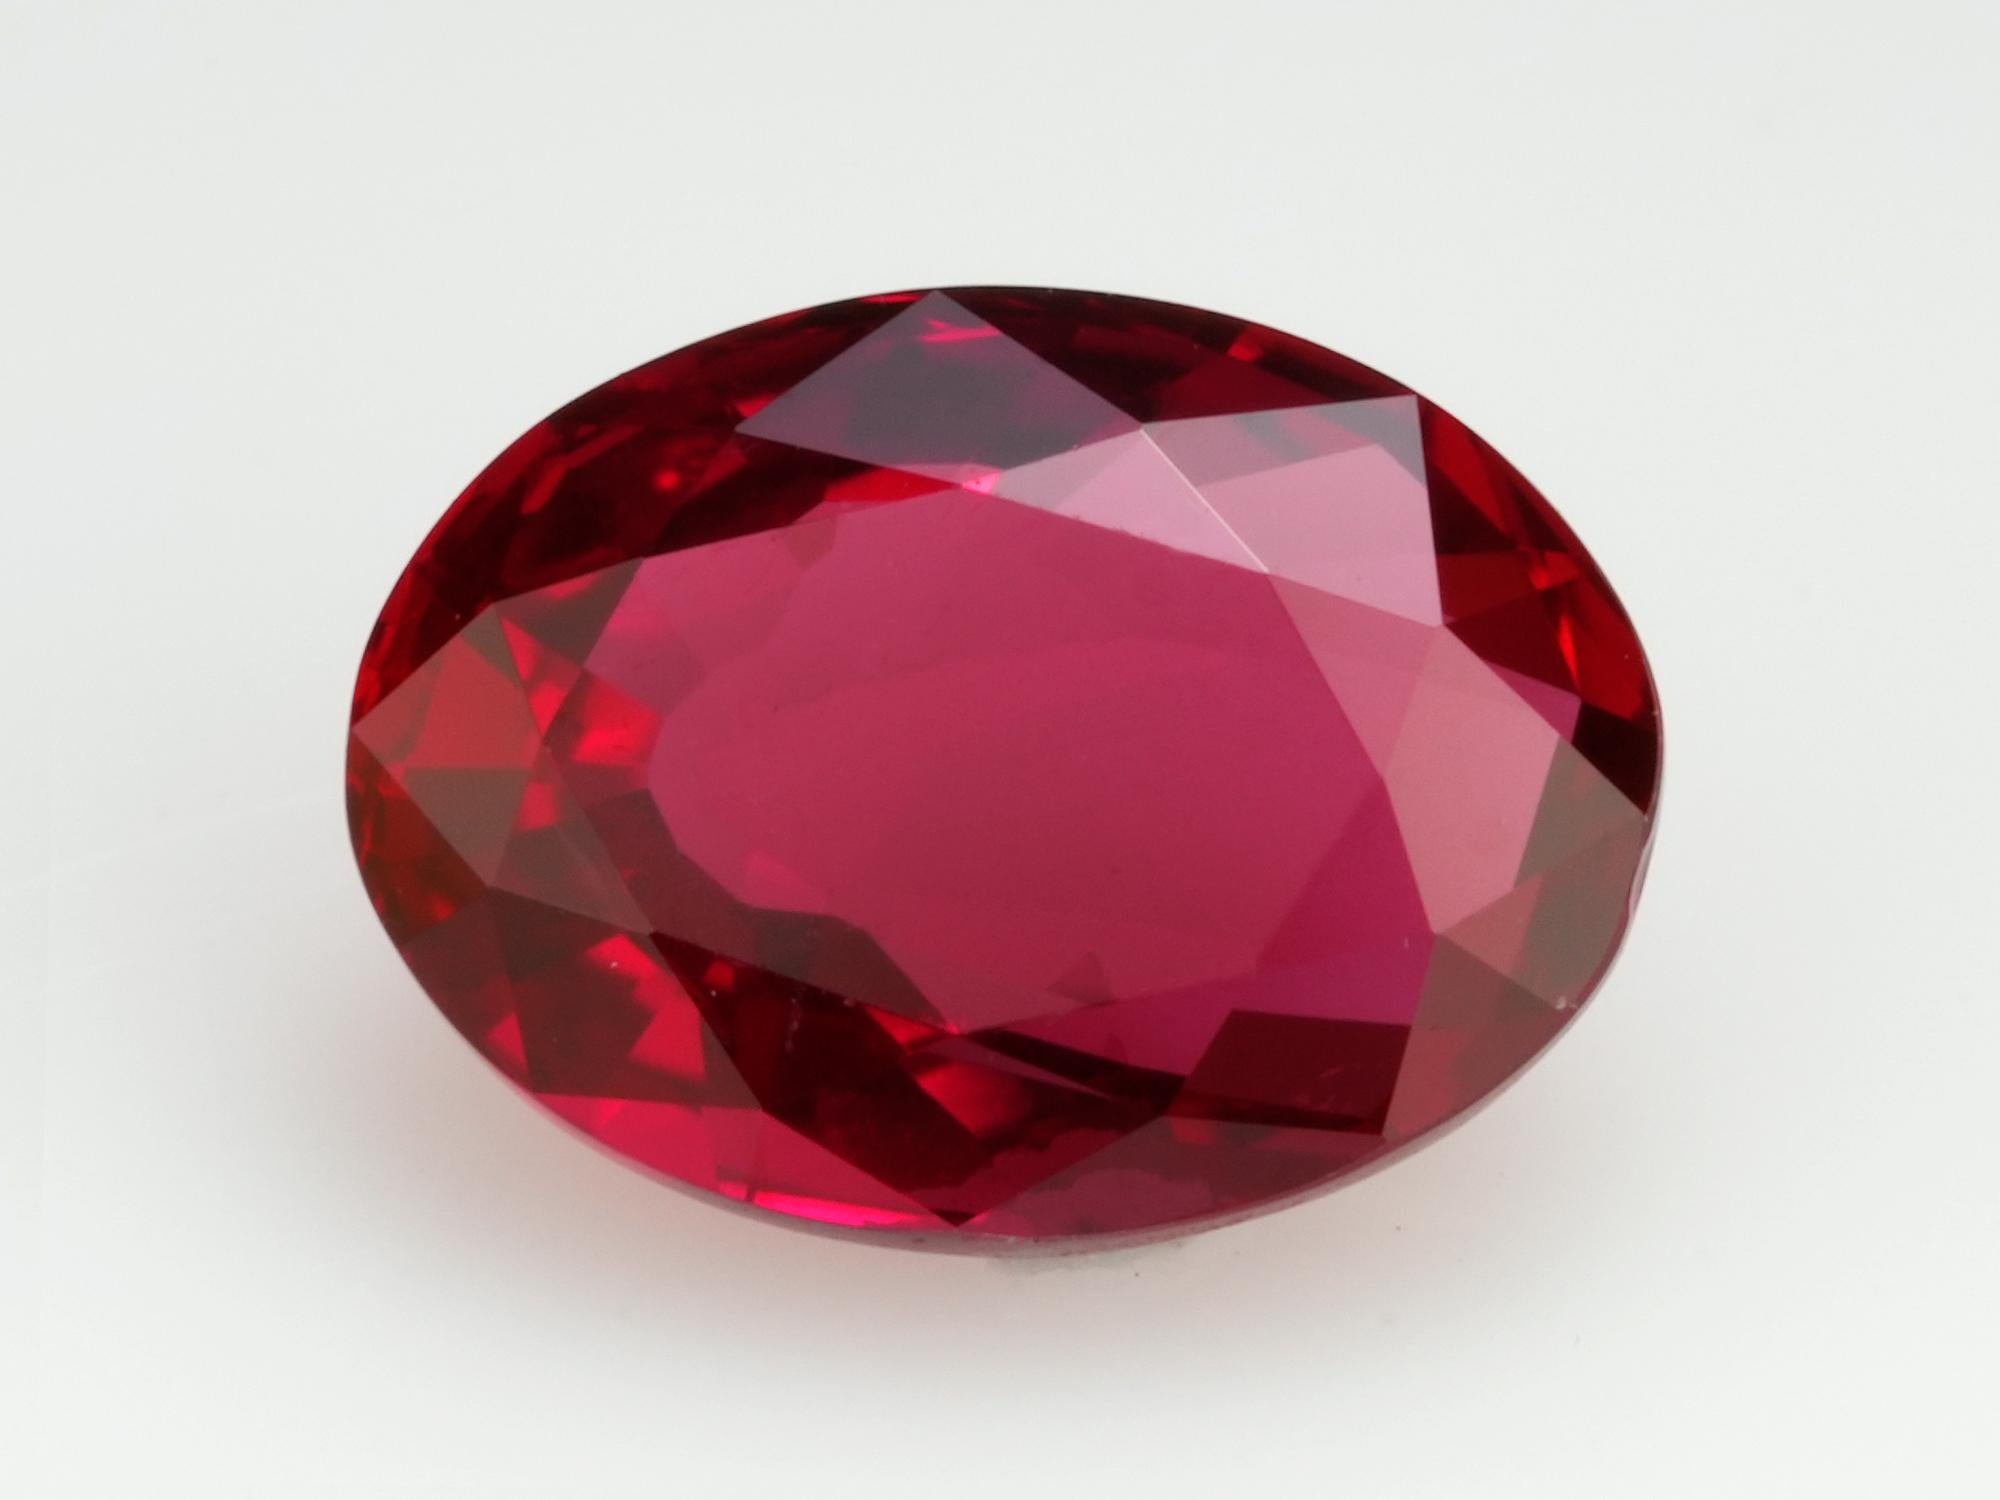 Ruby
Oval Shape
Color Red
Brilliant/Step Cut
Dimension 6.94x5.12x2.86
Weight 1.042 cts.
Country of Origin Mozambique

GEM RARITY: UNEARTHLY THE RAREST GEM

Witness the unique journey of colored gemstones, experience a new level of iconic statements